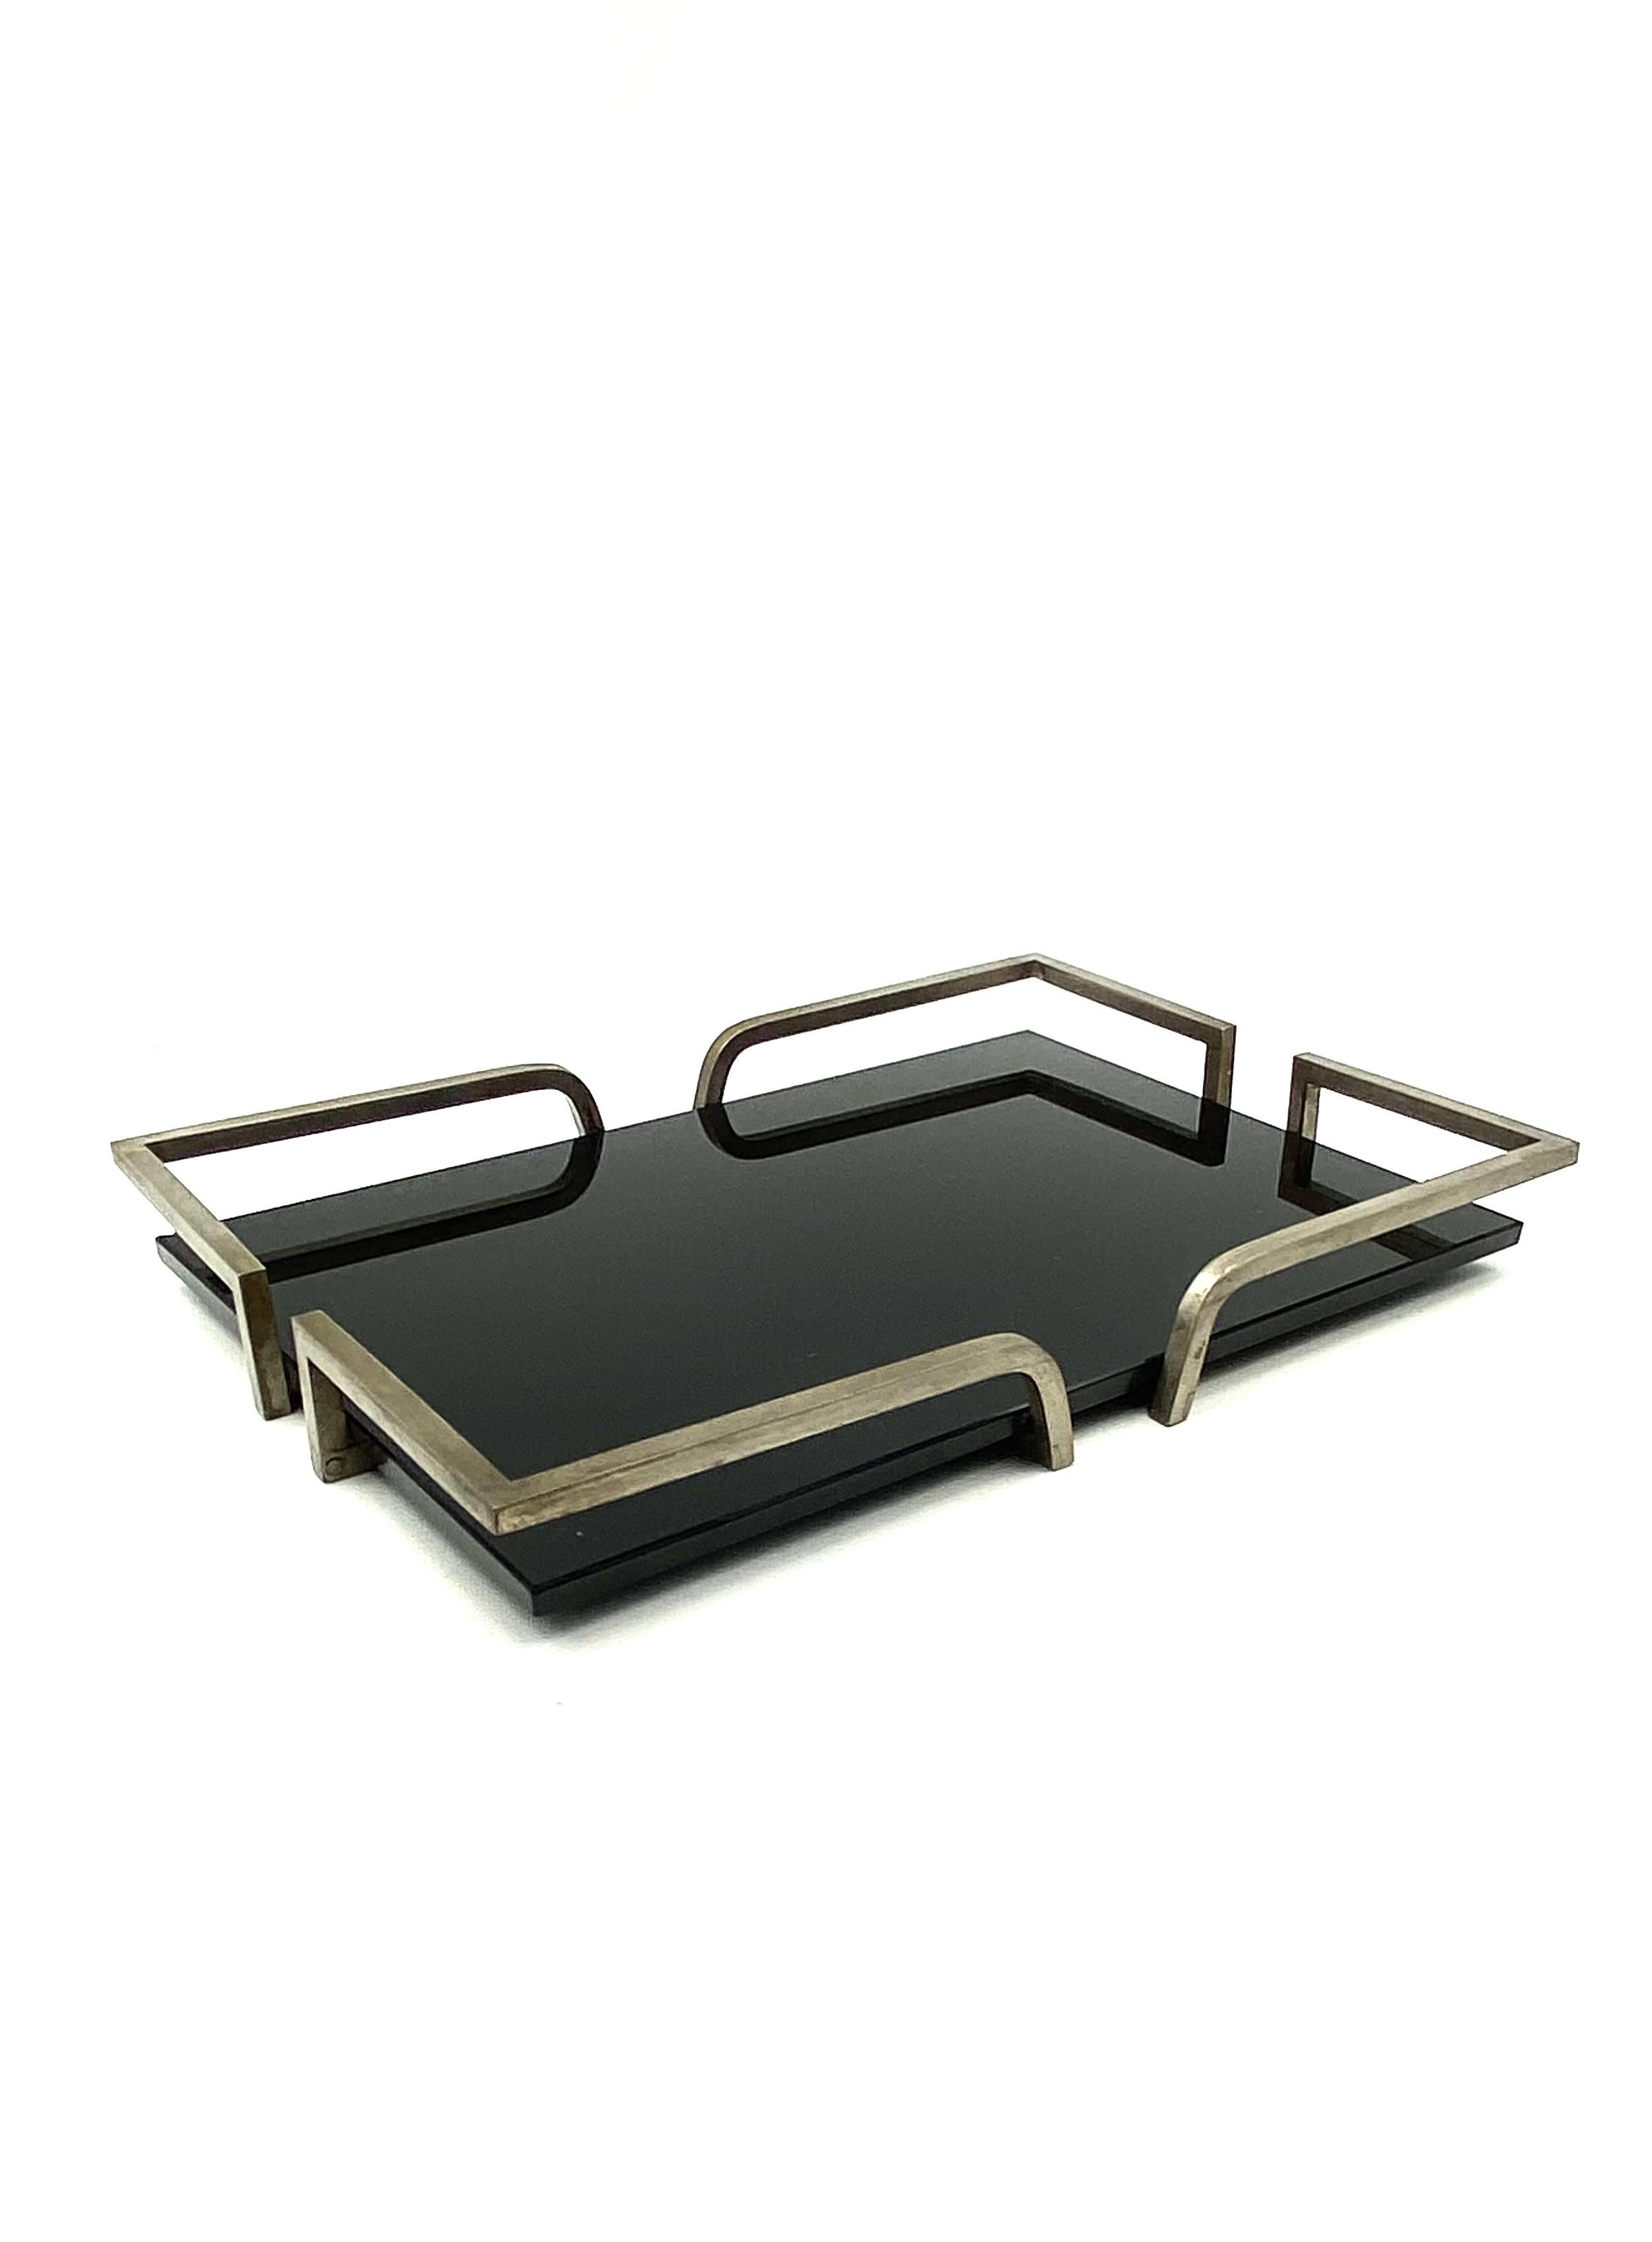 Hollywood regency black glass tray. Brass structure

France 1970s

H 5.5 cm - 40.5 x 28.5 cm

Conditions: very good consistent with age and use, small chip on one angle, check the pictures.